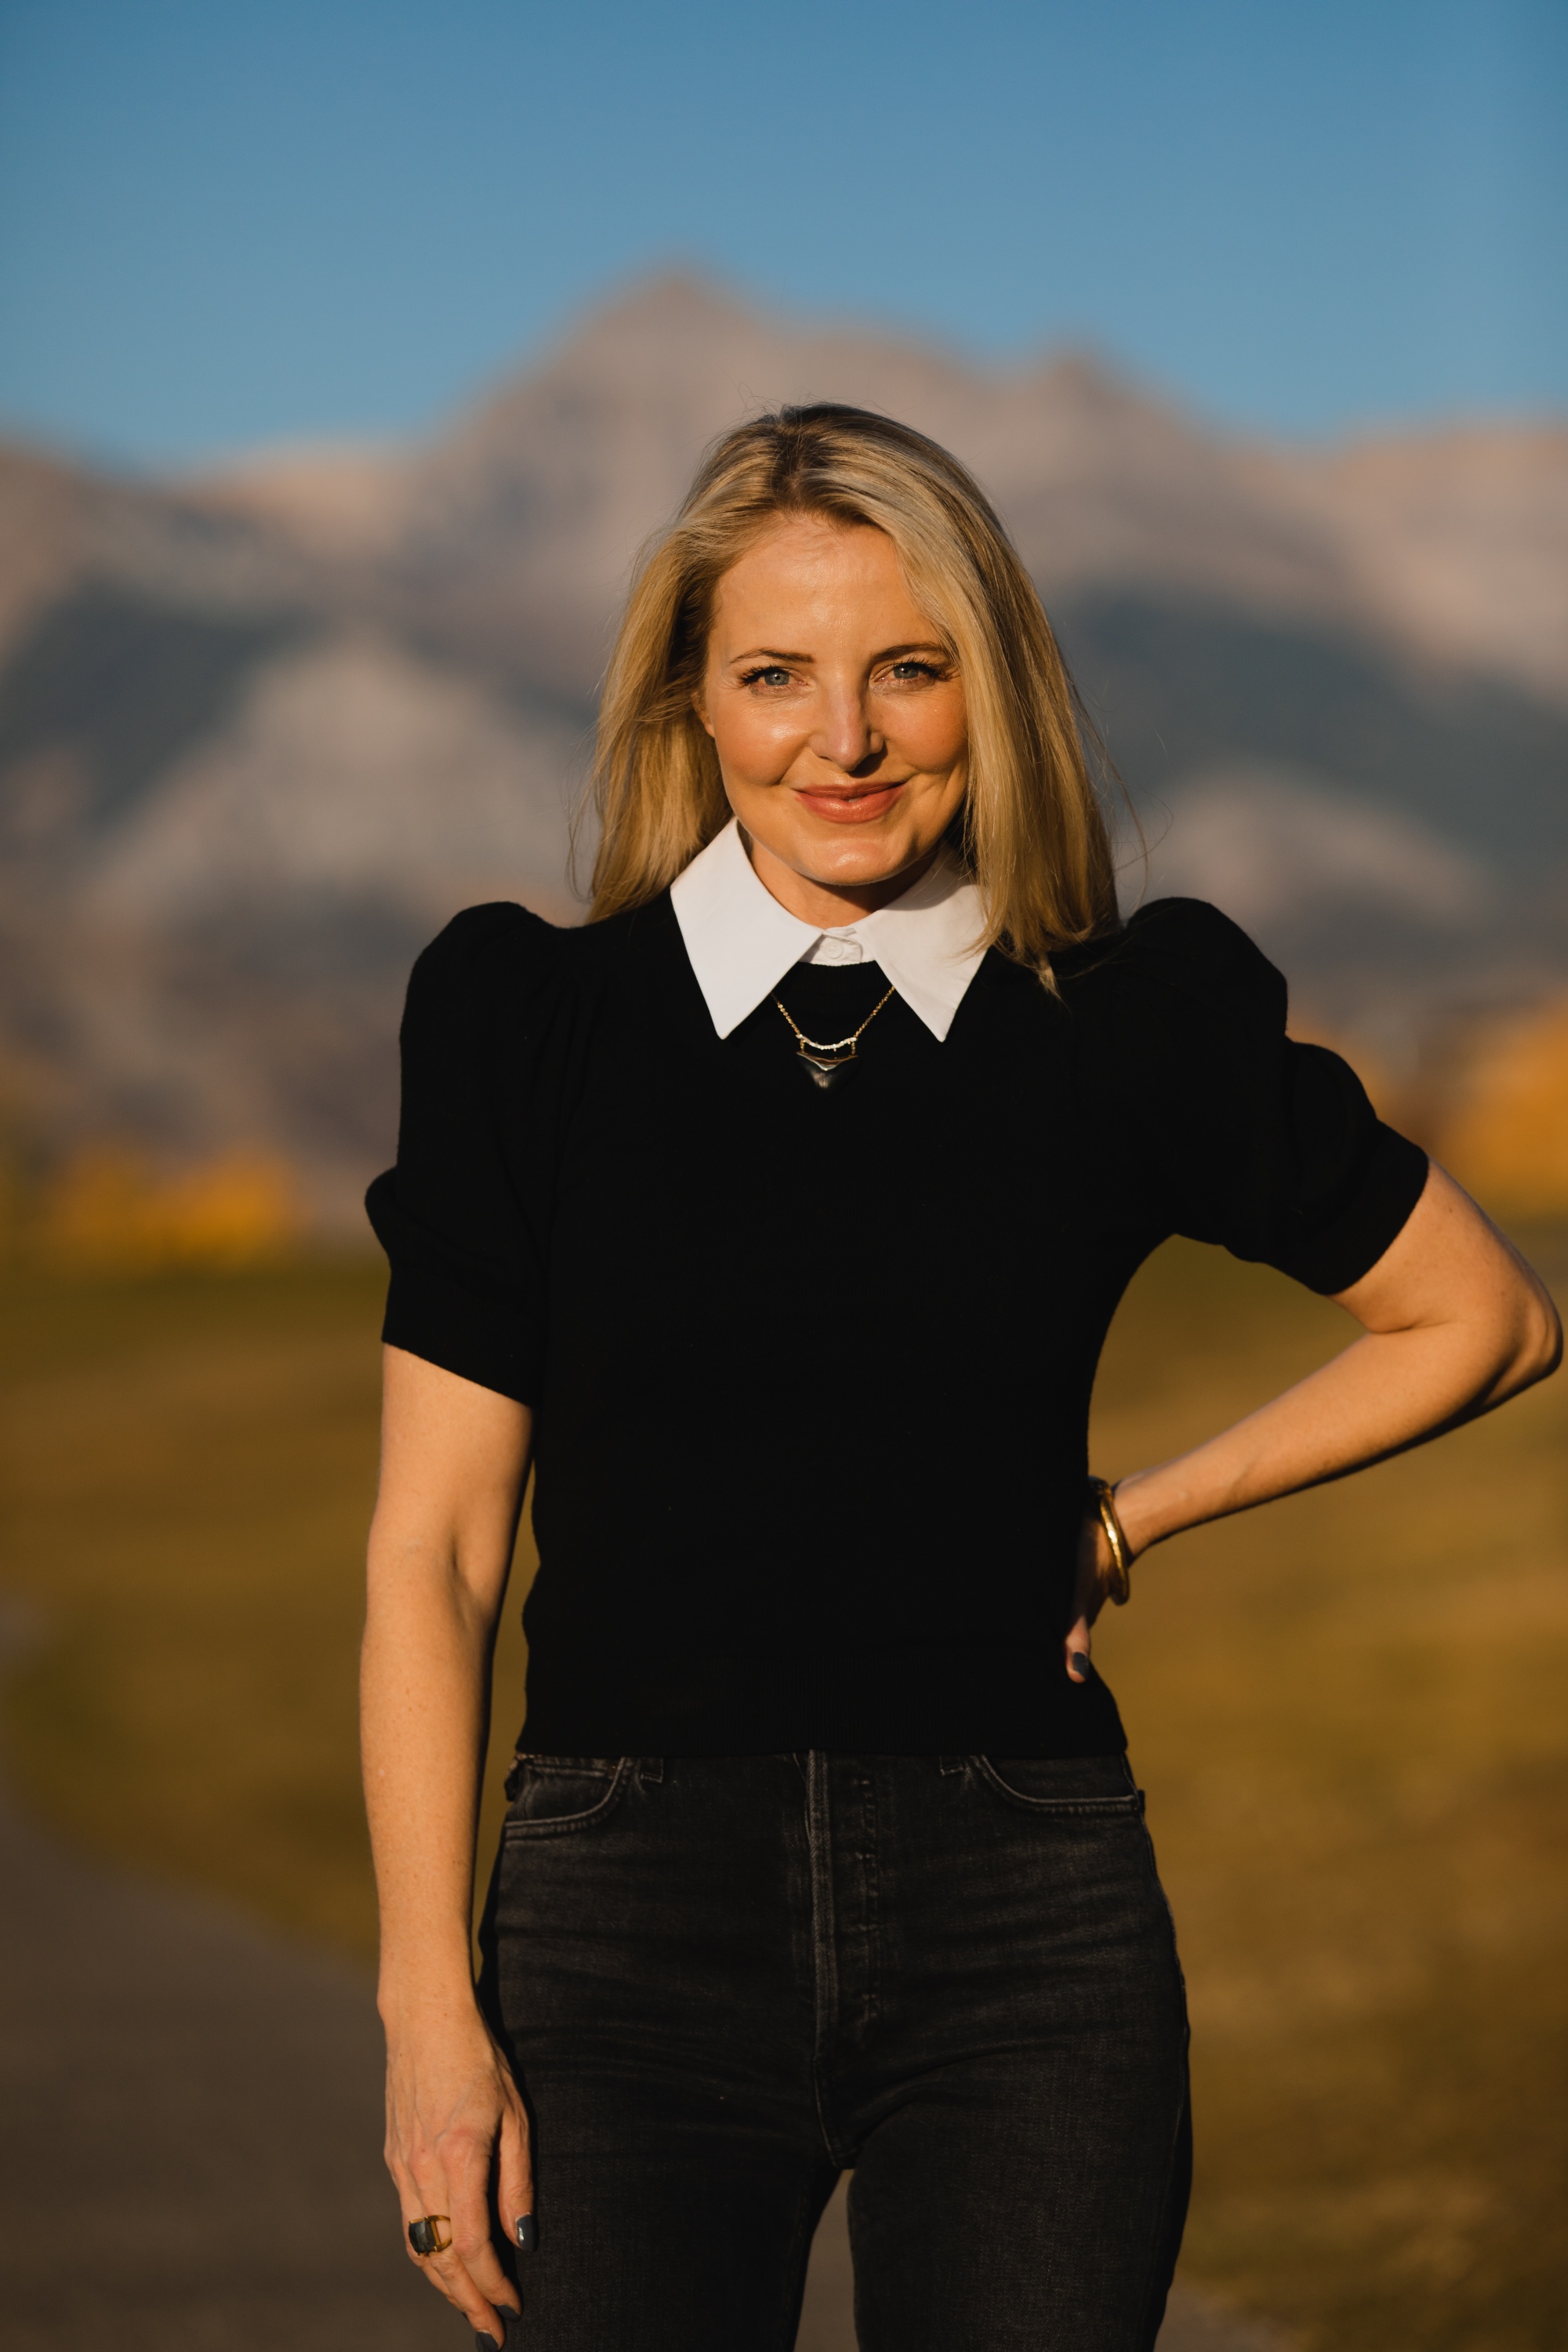 Layered Sweater, Erin Busbee of Busbee Style wearing a black puff shoulder layered sweater by Alice + Olivia with gray wash Agolde Nico jeans in Telluride, Colorado